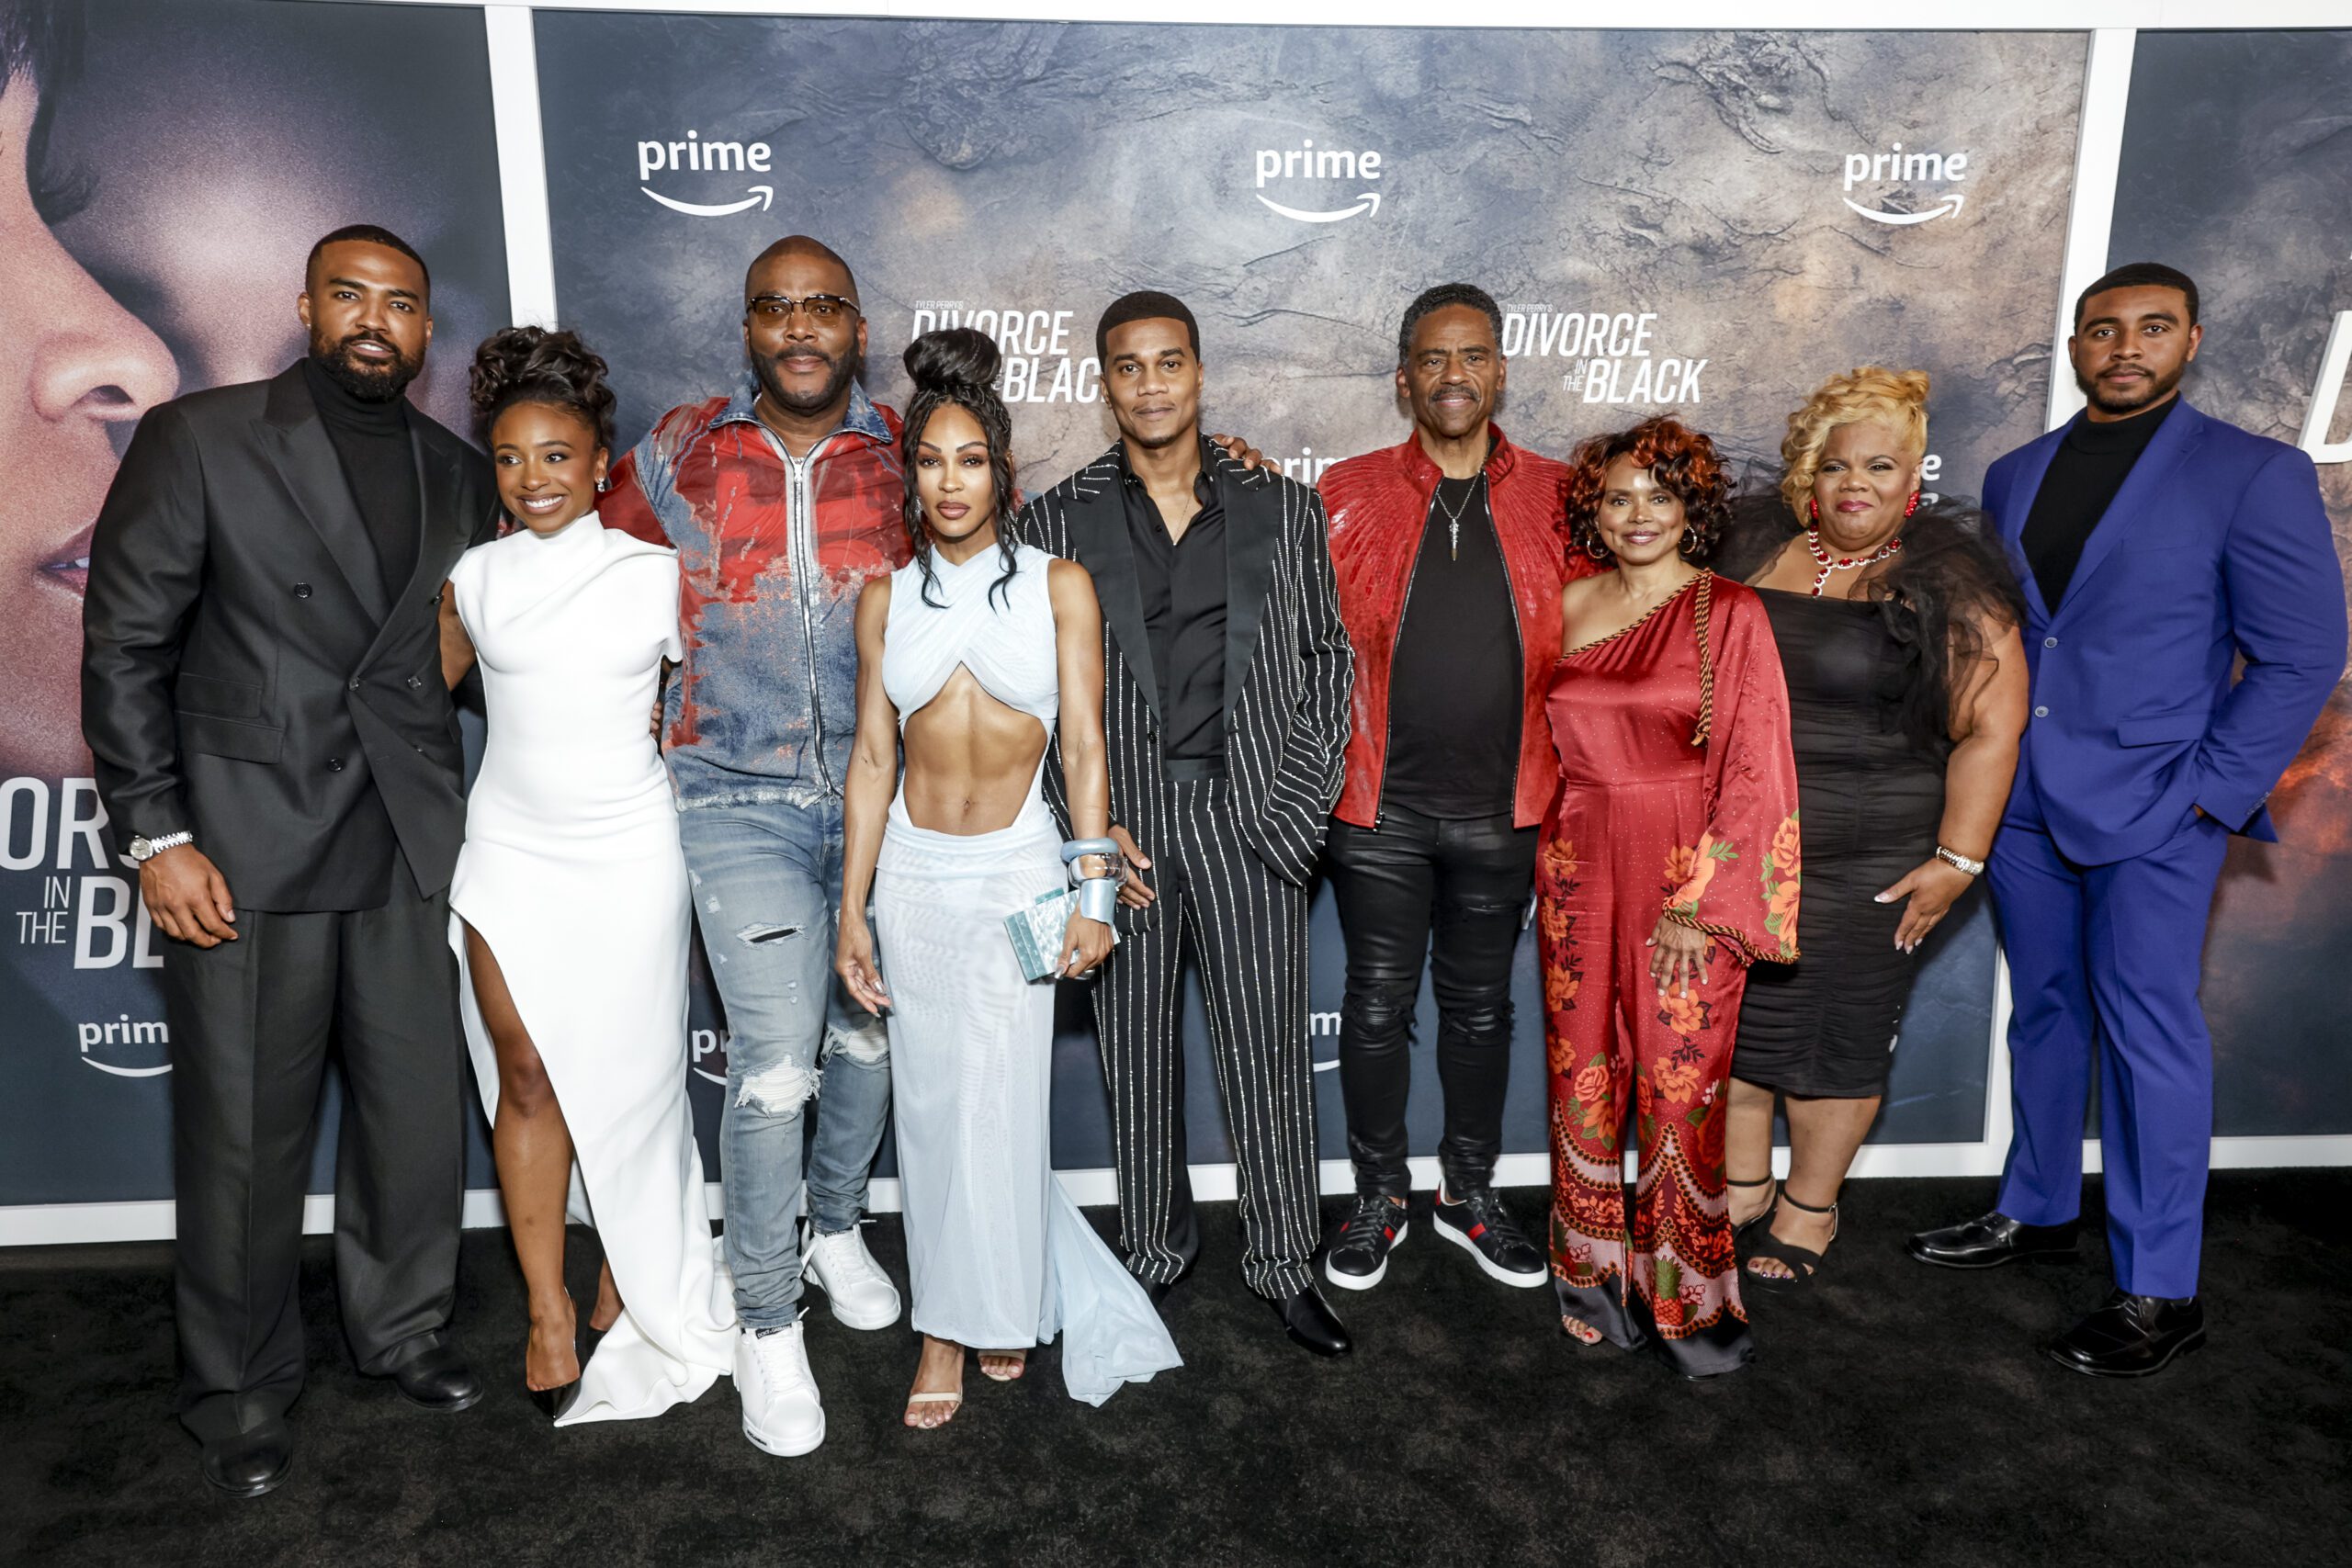 Prime Video’s Tyler Perry’s “Divorce In The Black” NY Premiere